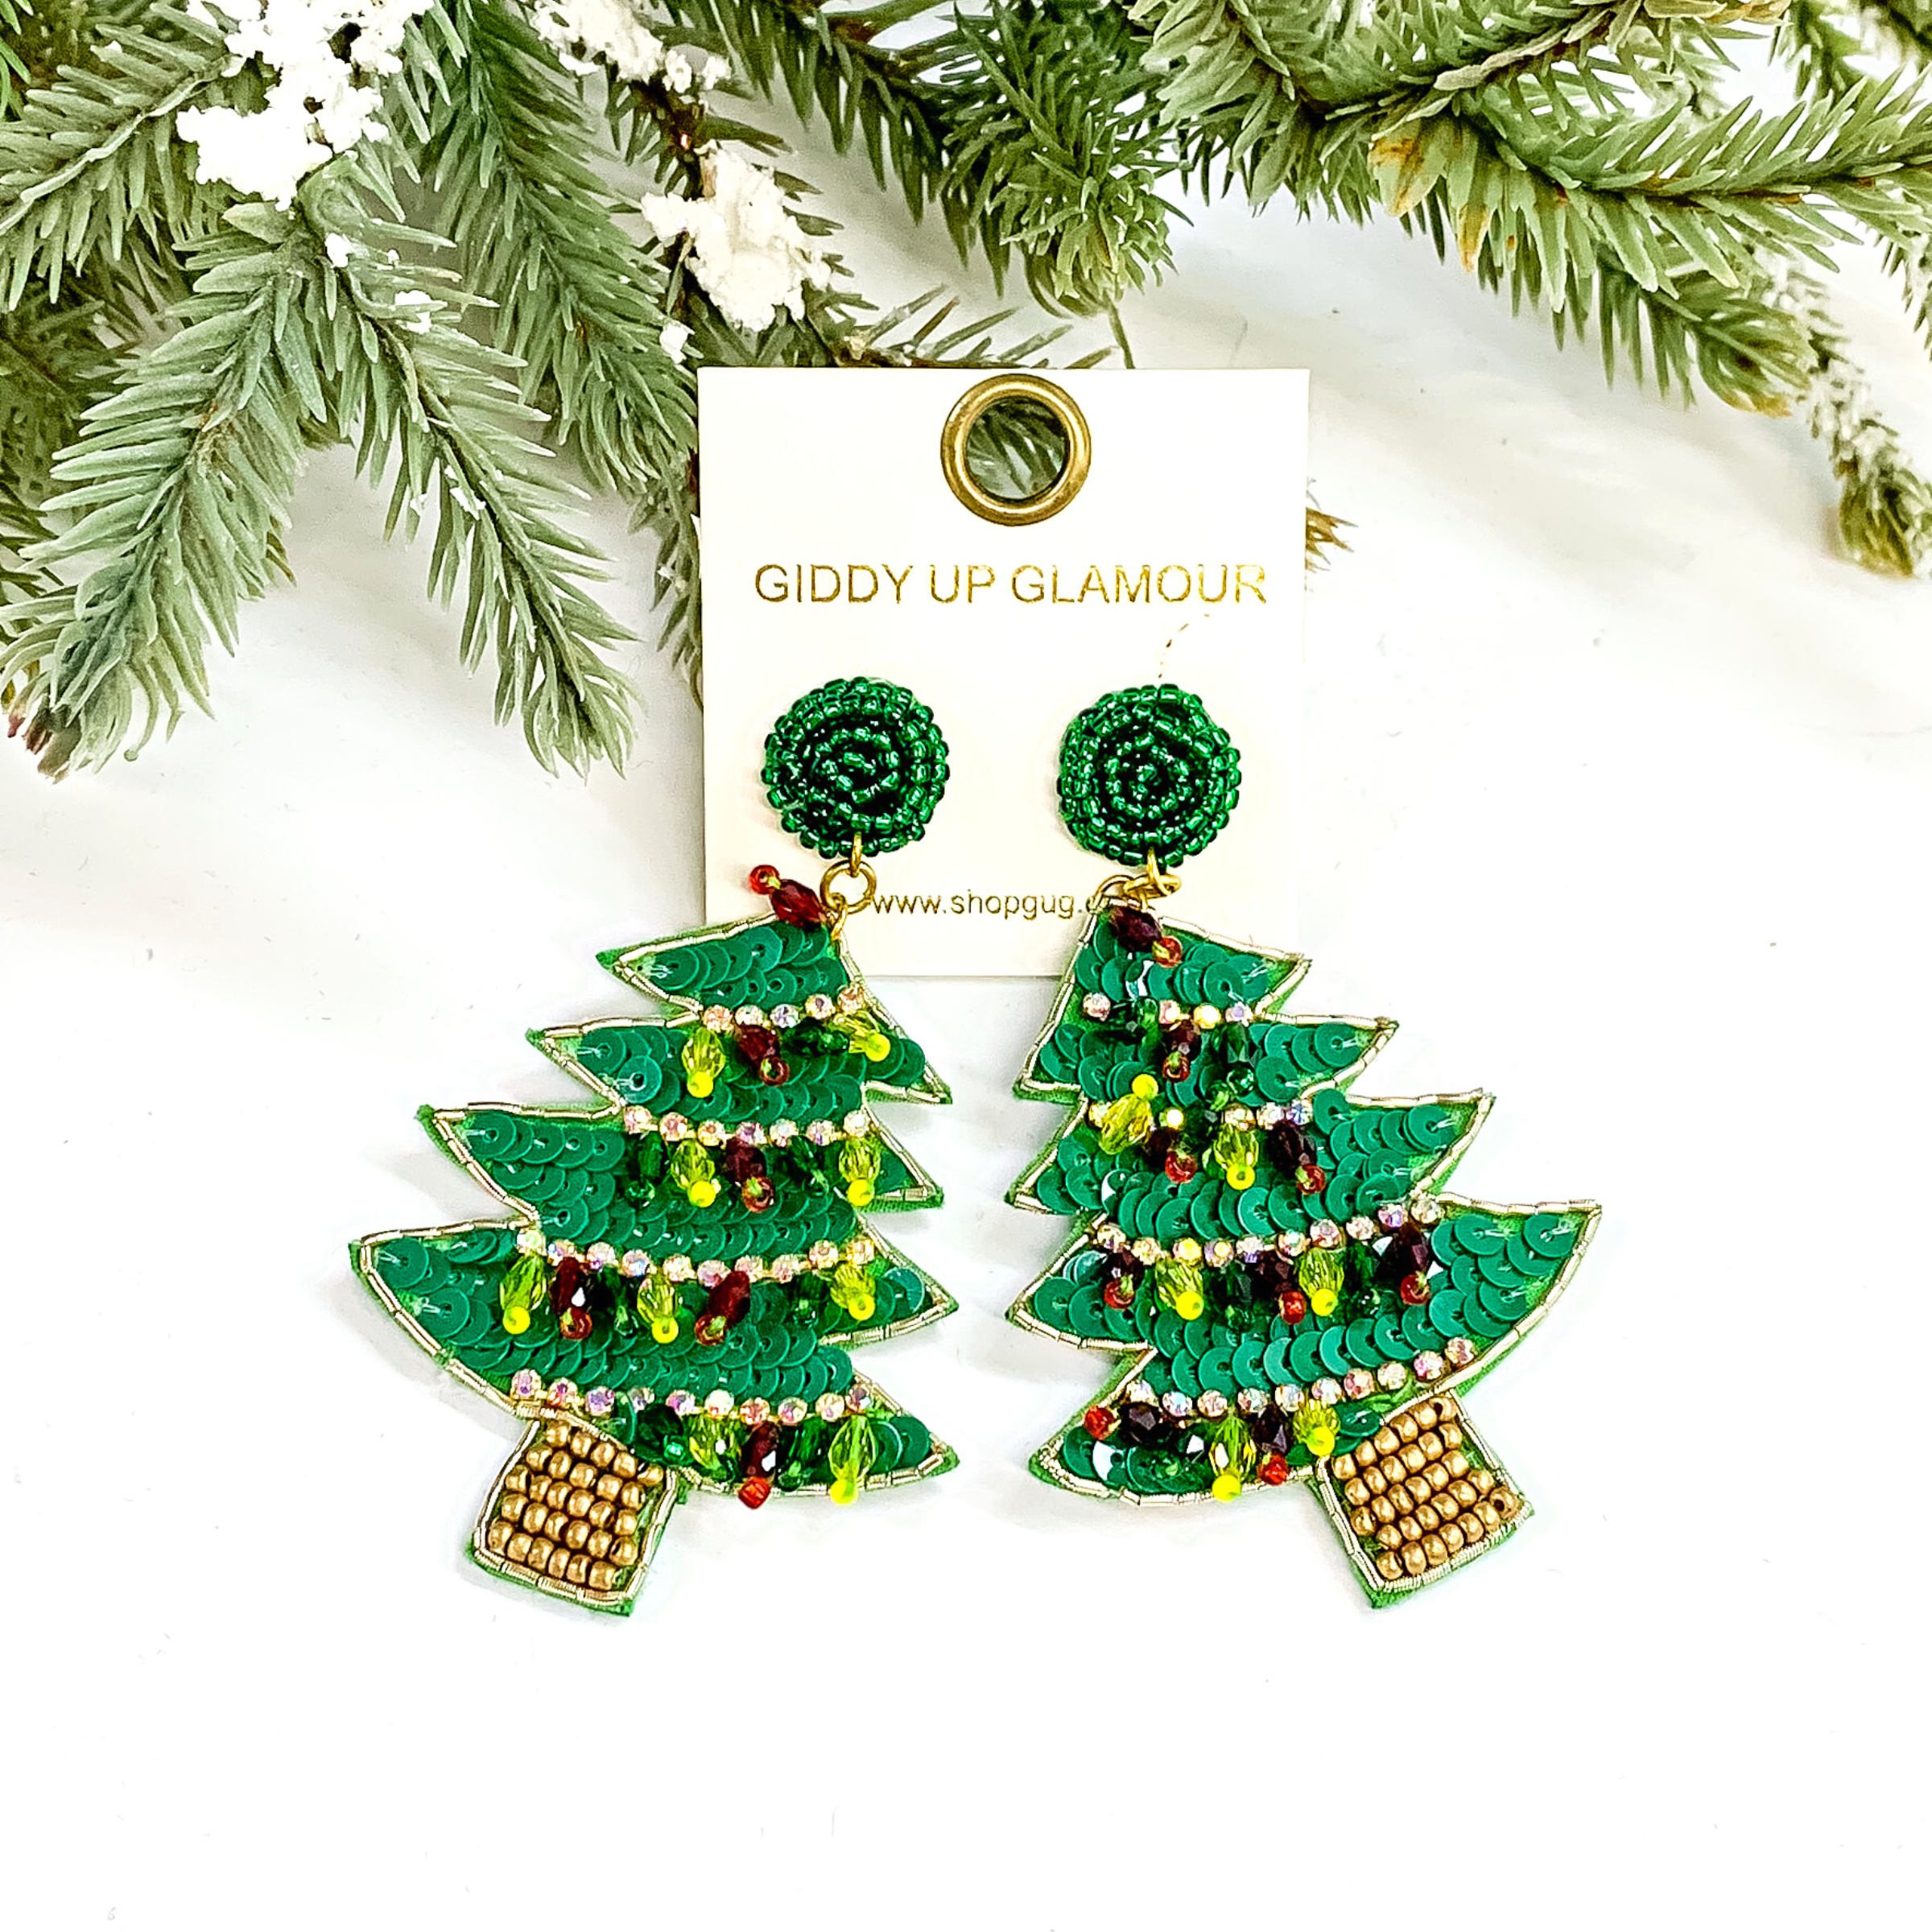 These are green Christmas tree earrings with beads and sequins in different colors. The tree earrings have green squins with a gold trim all around, the 'ribbon' are small ab crystals and the 'light' are small, teardrop crystals in red, green, and yellow. The stem has gold beads. These earrings are taken on a white background with a green tree and snow as decor.